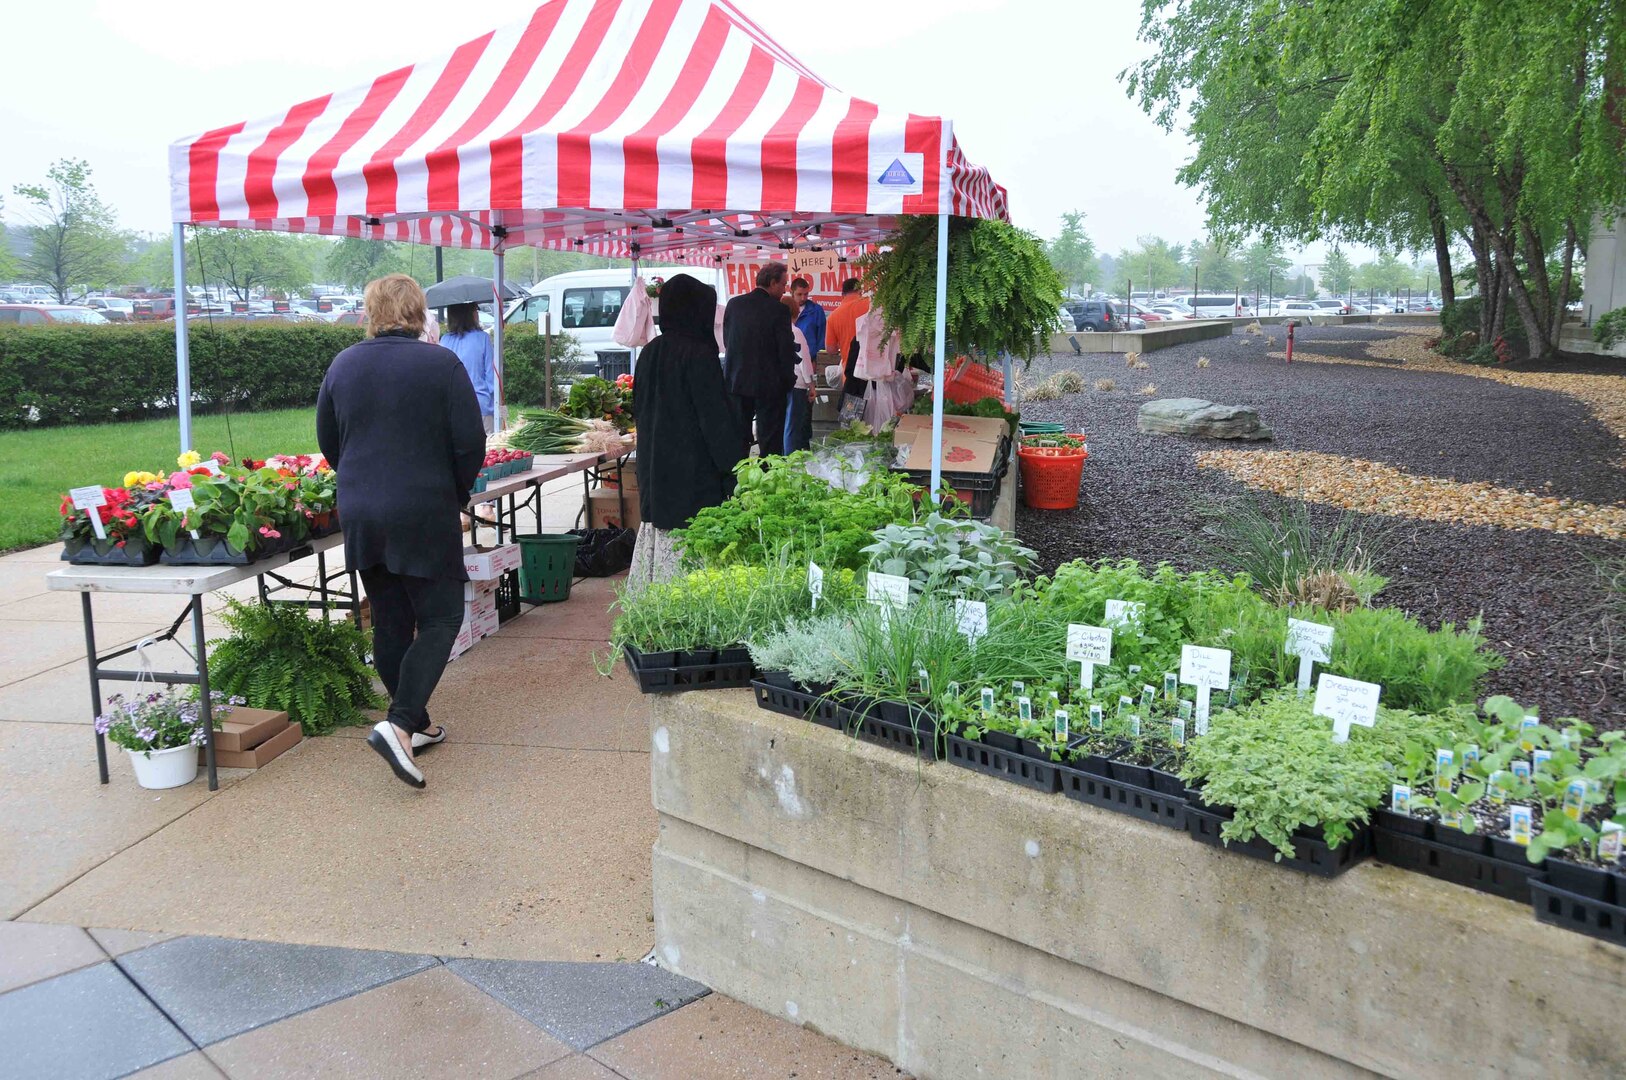 Despite the wet weather, HQC employees flock to purchase produce and plants at the kickoff of DLA's farmers' market, May 11.

